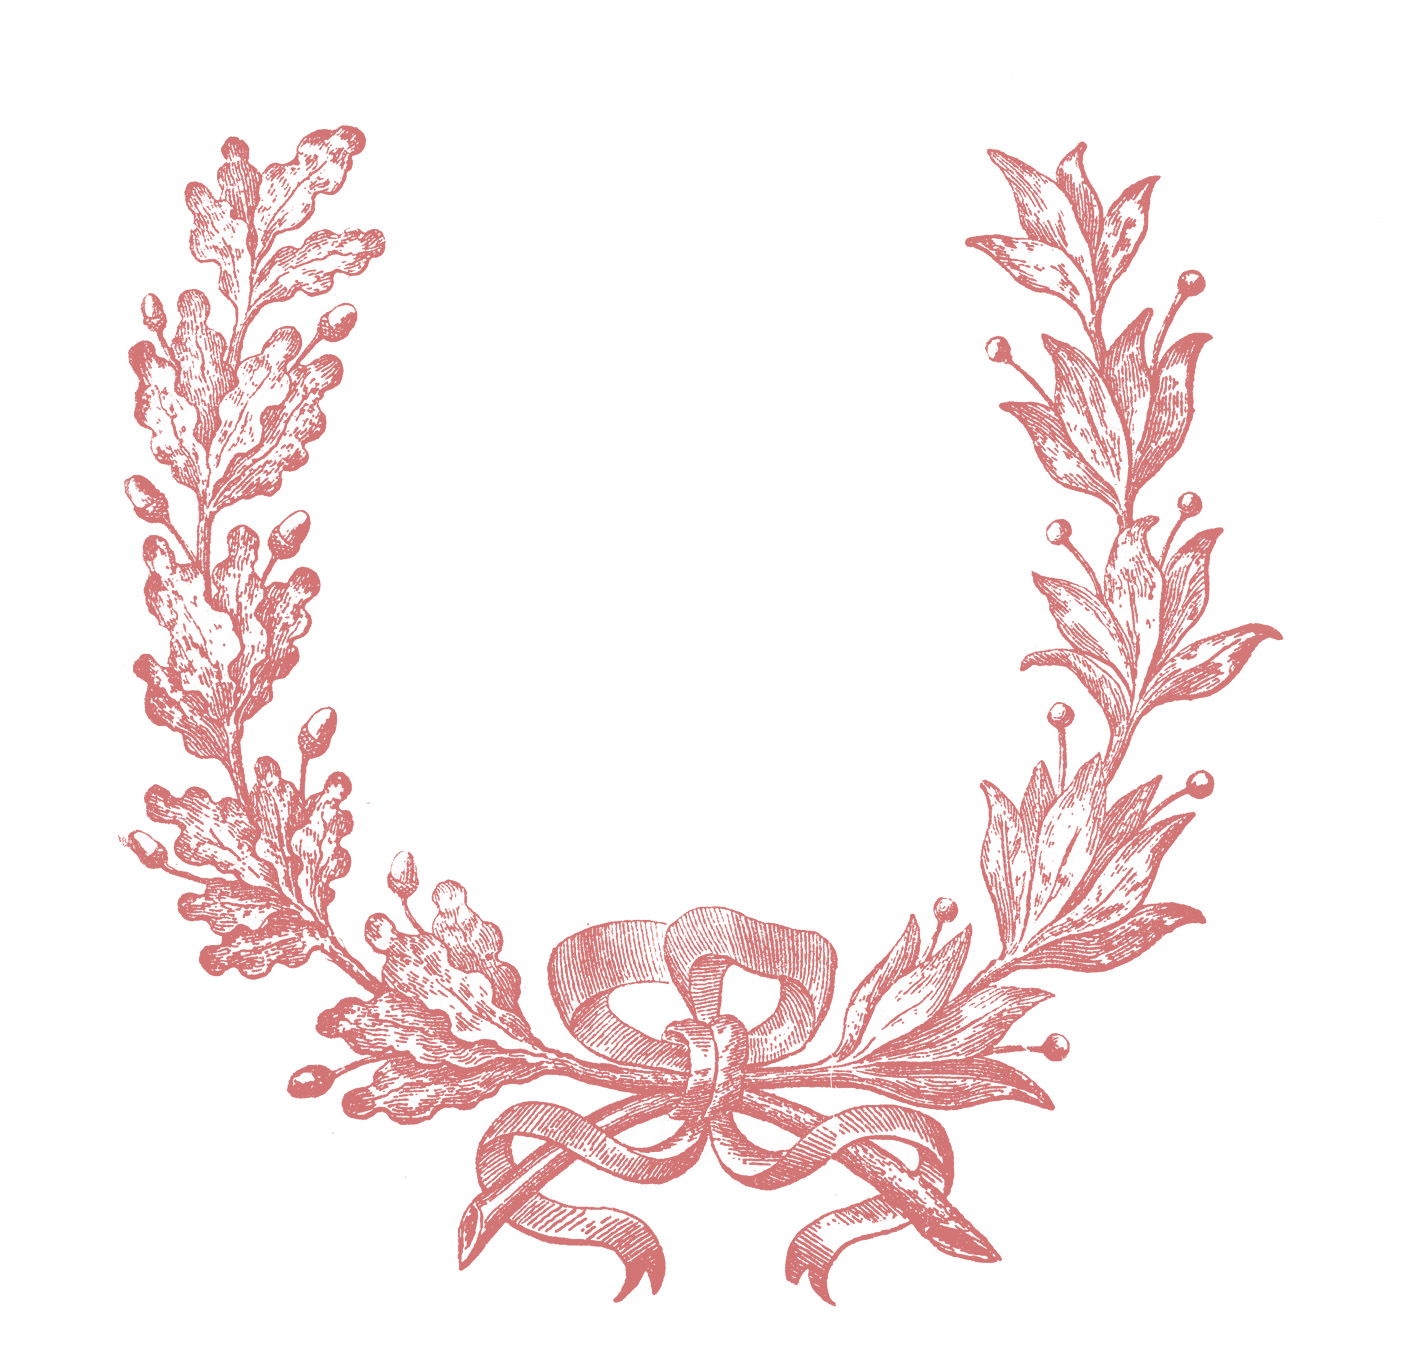 Vintage Clip Art - French Wreath Engraving - The Graphics Fairy1420 x 1349